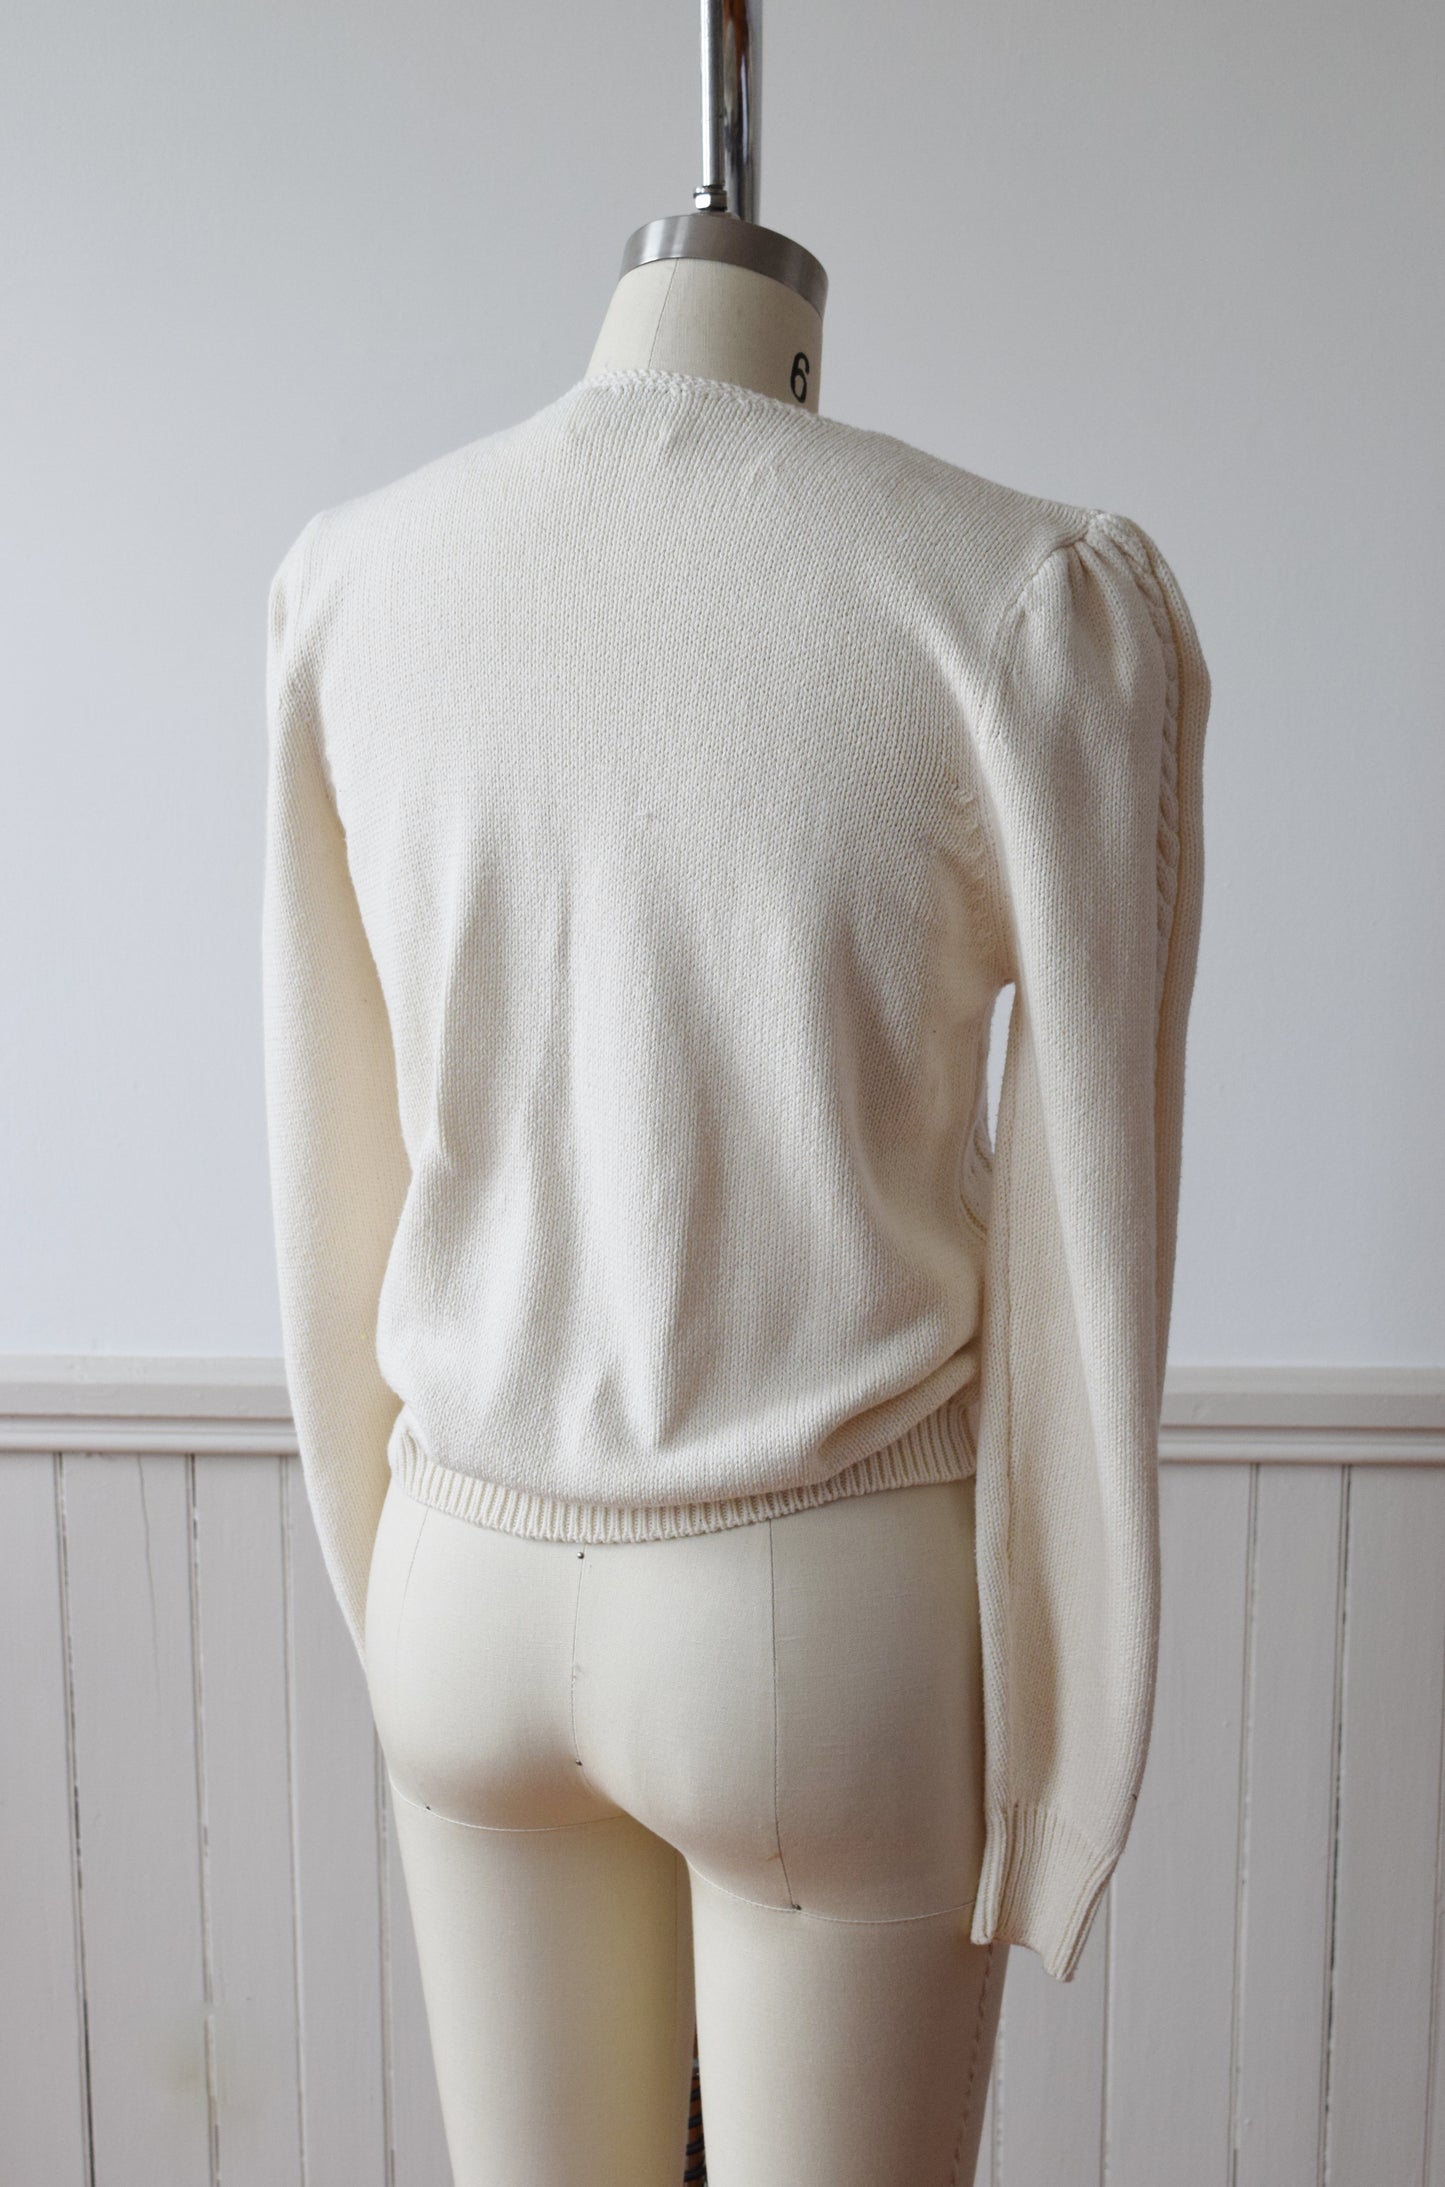 1930s Inspired Knit Cardigan | S